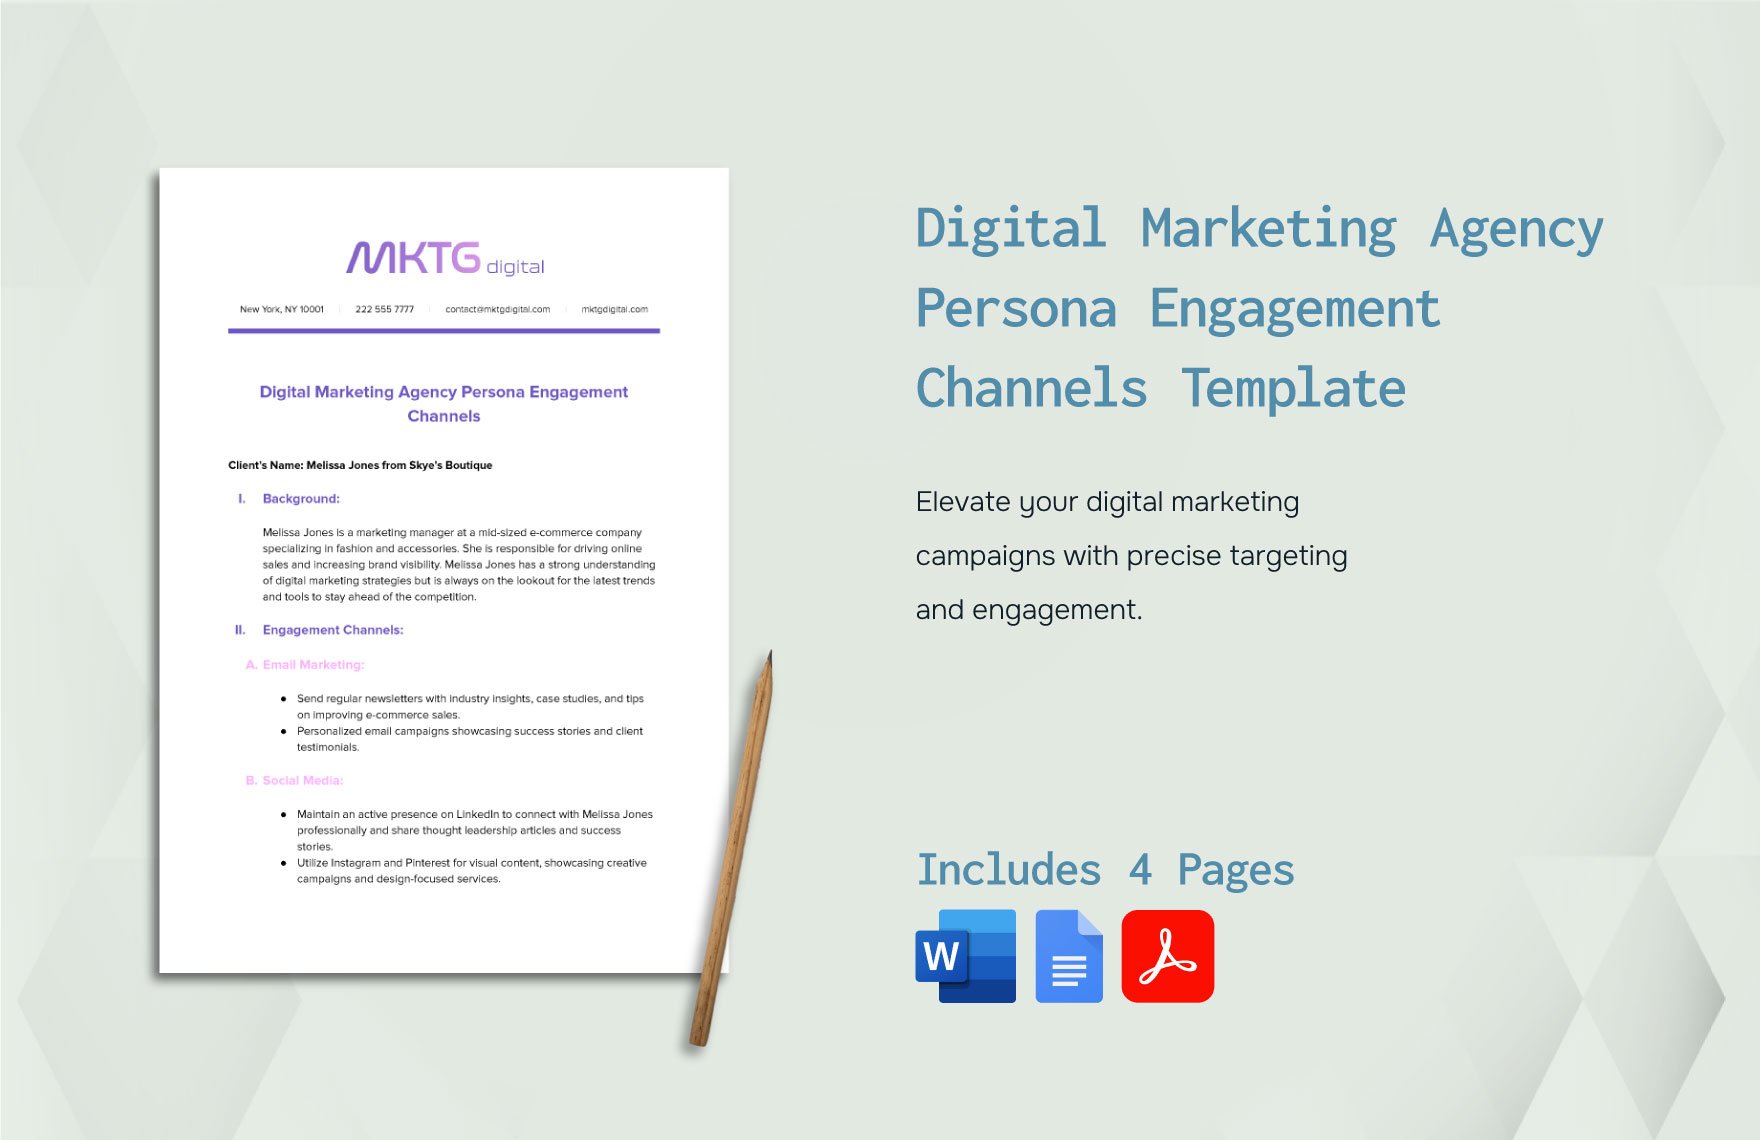 Digital Marketing Agency Persona Engagement Channels Template